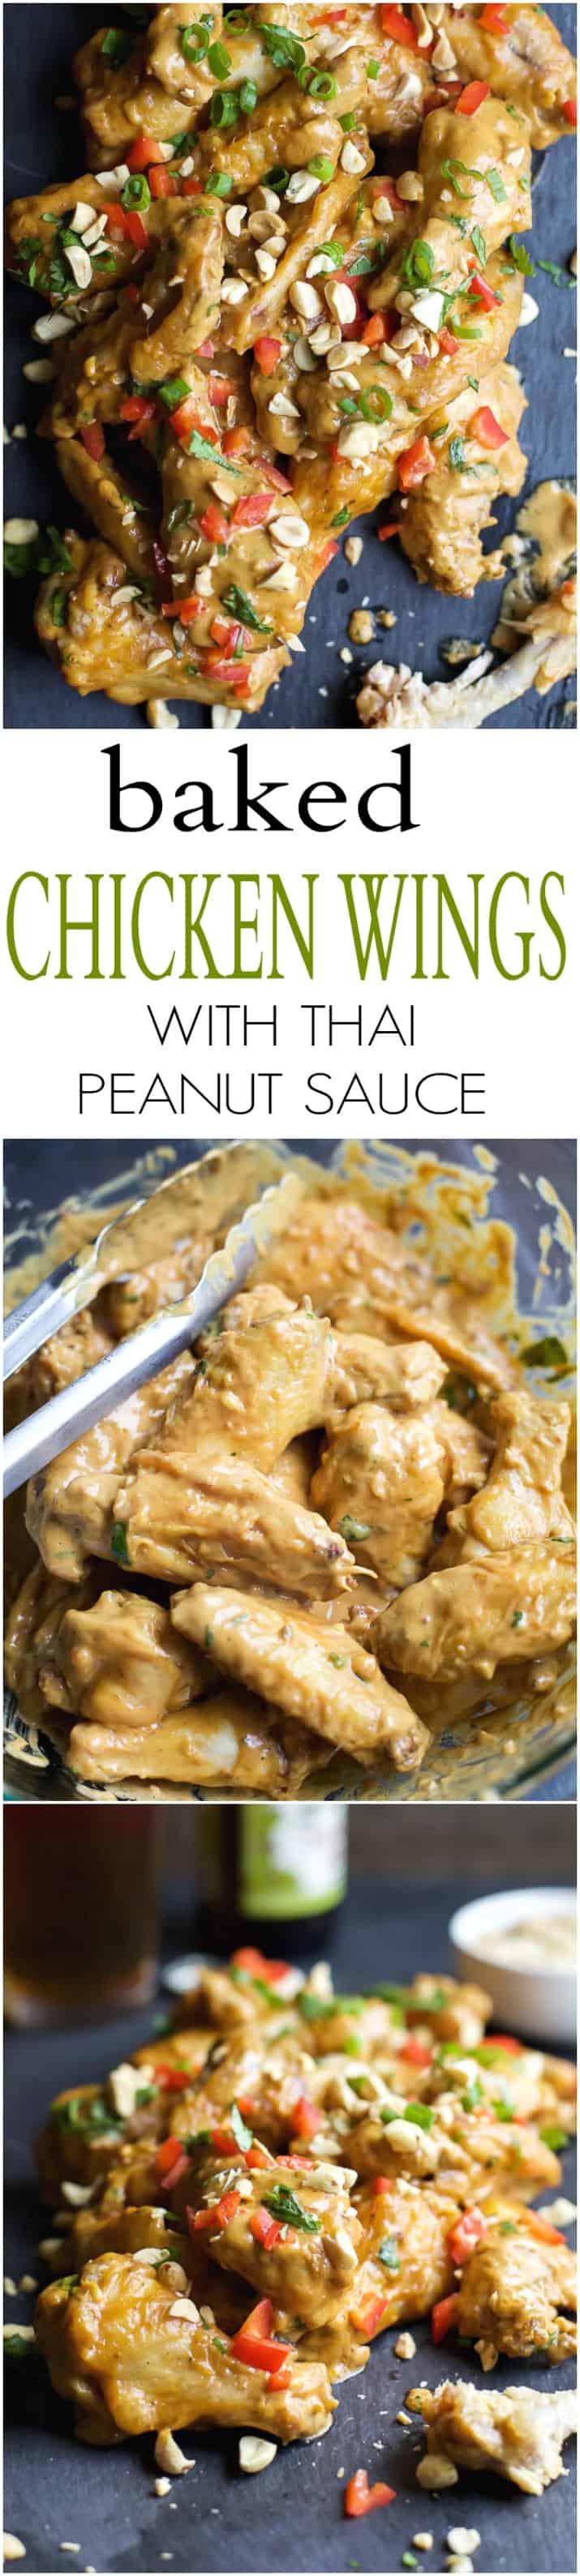 Title Image for Crispy Baked Chicken Wings with Thai Peanut Sauce